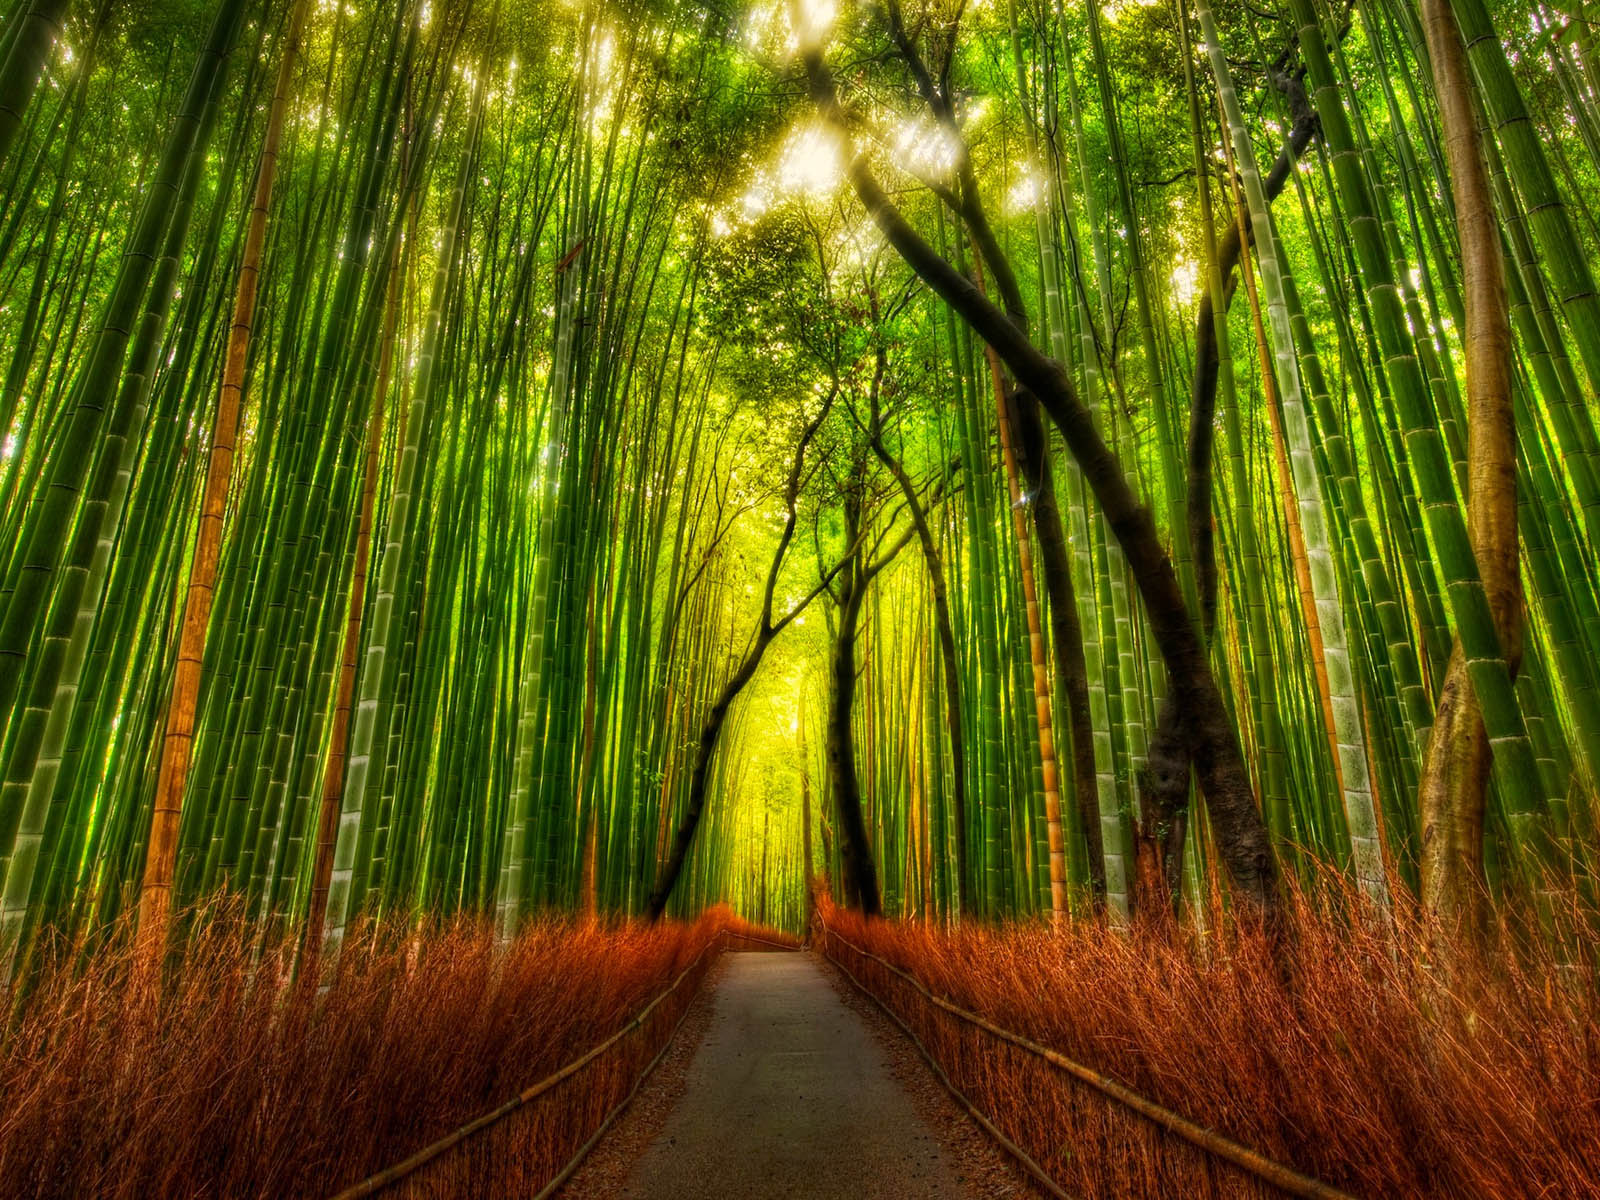 Green Japanese Bamboo Forest and Growing Oriental Wallpaper Natural Bamboo  Stock Photo  Image of leaf forest 194253074